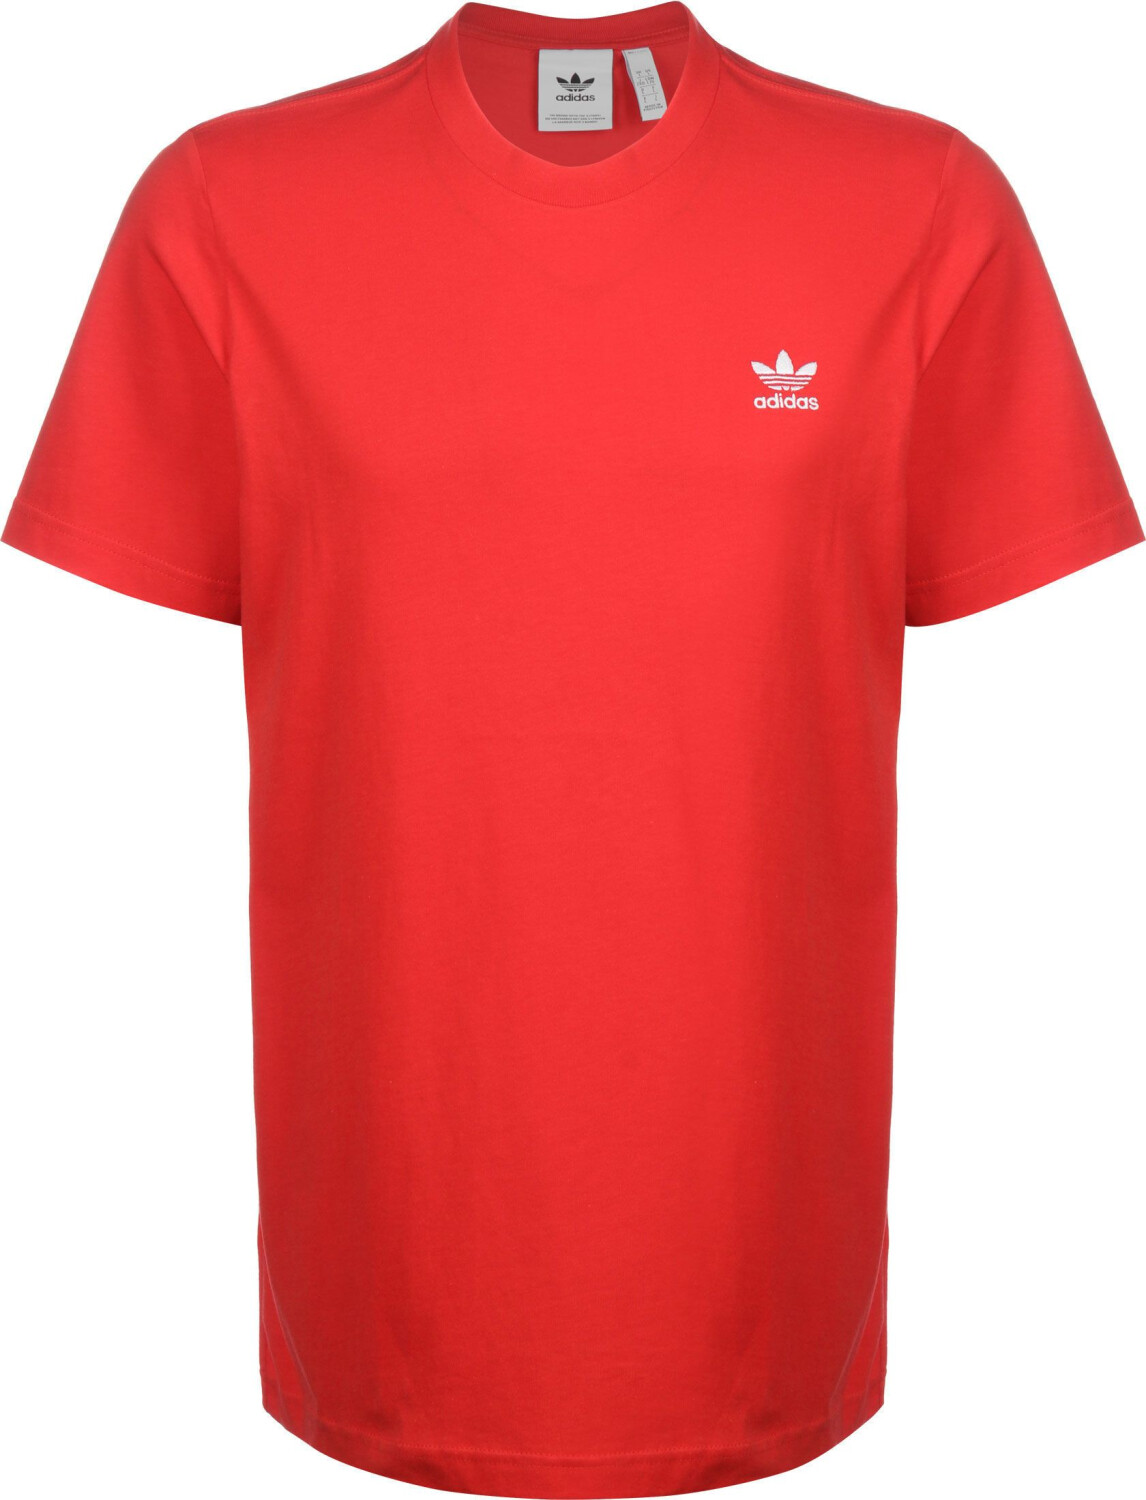 Buy Adidas on Deals Trefoil (Today) – T-Shirt from Best Essentials £9.99